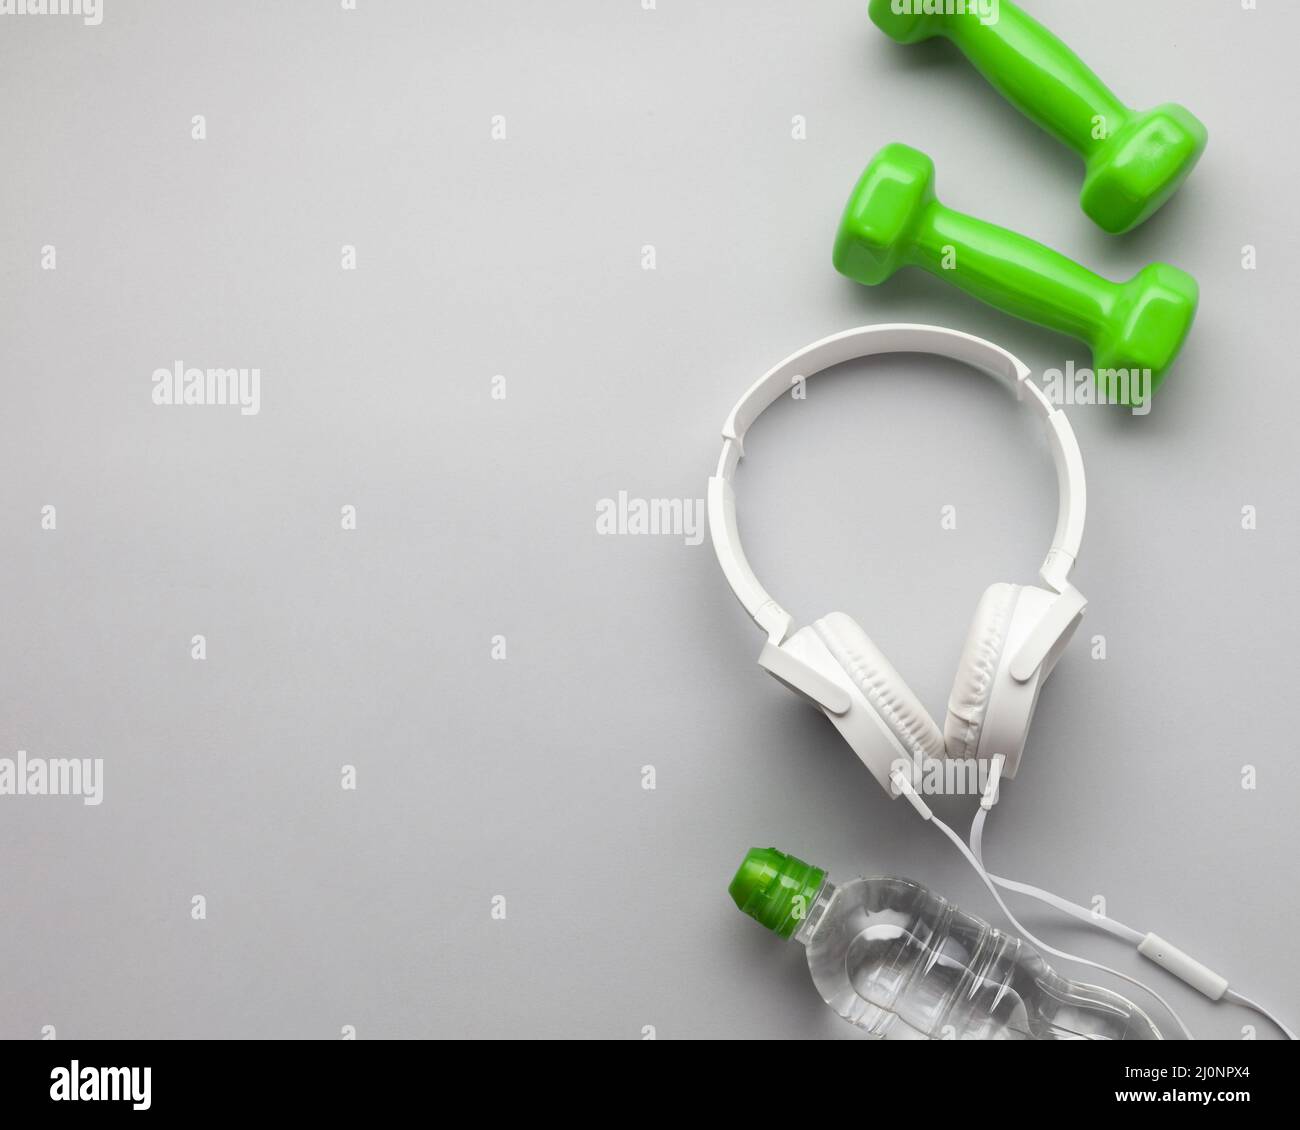 Top view arrangement with green dumbbells copy space. High quality and resolution beautiful photo concept Stock Photo